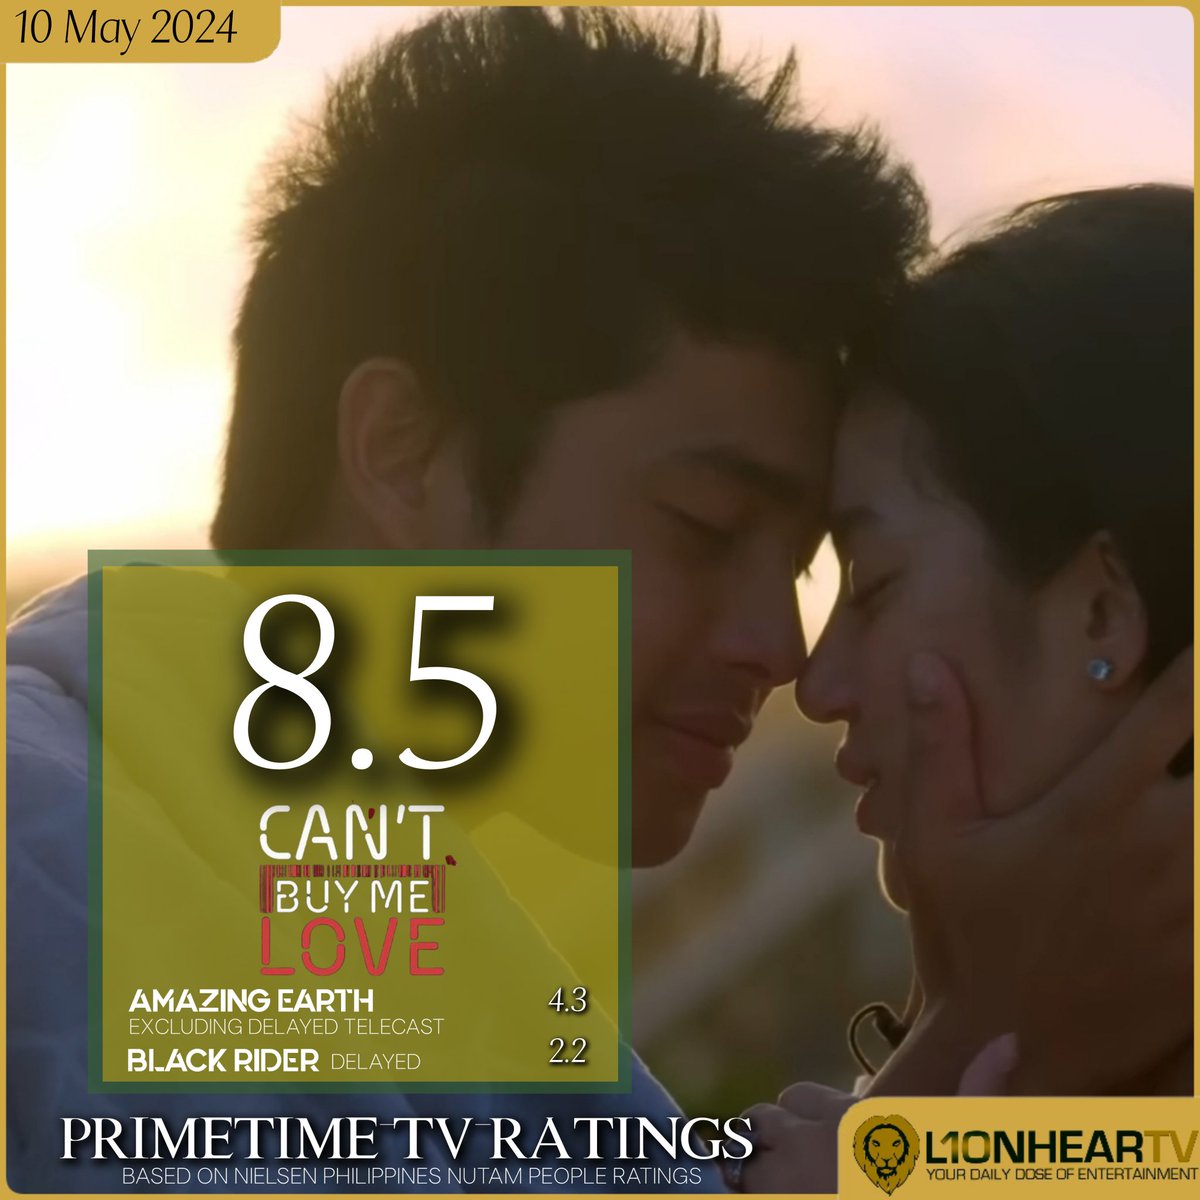 LOOK: #CantBuyMeLove replicated its highest people rating of 8.5 (logged on May 2), on its finale, May 10, to end its phenomenal run on Philippine TV on a high note. MORE RATINGS: lionheartv.net/ratings